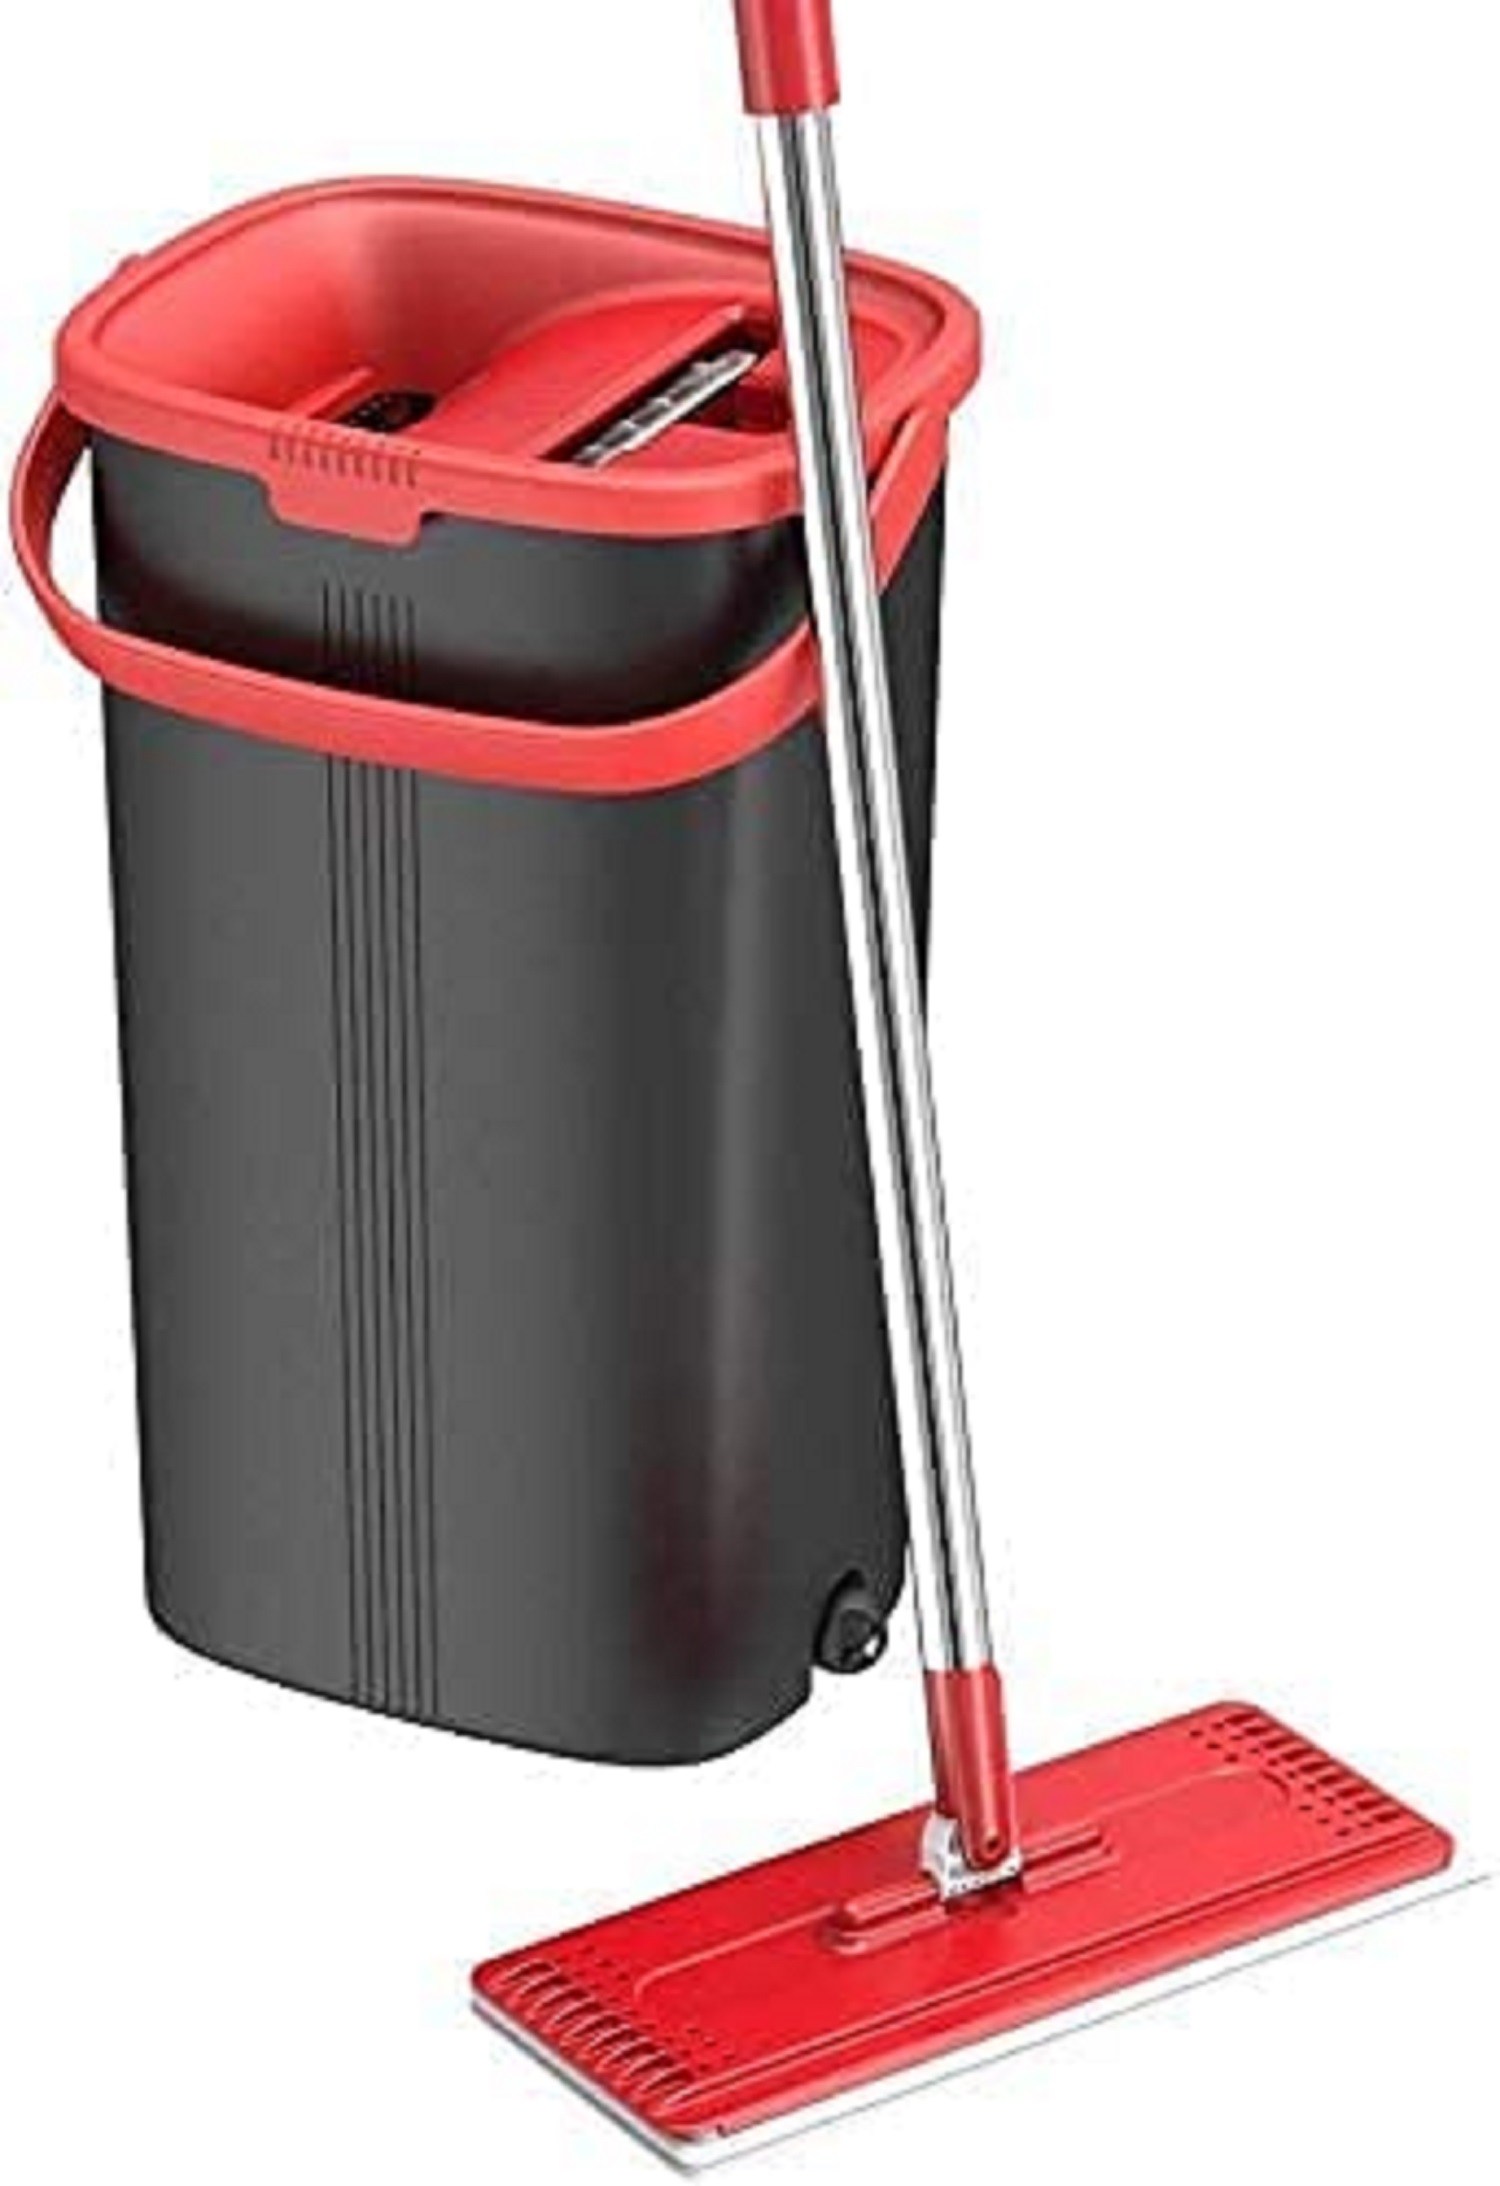 X3 Mop, Separates Dirty and Clean Water, 3-Chamber Design, Flat Mop and Bucket Set, Hands Free Home Floor Cleaning, 3 Reusable Microfiber Mop Pads